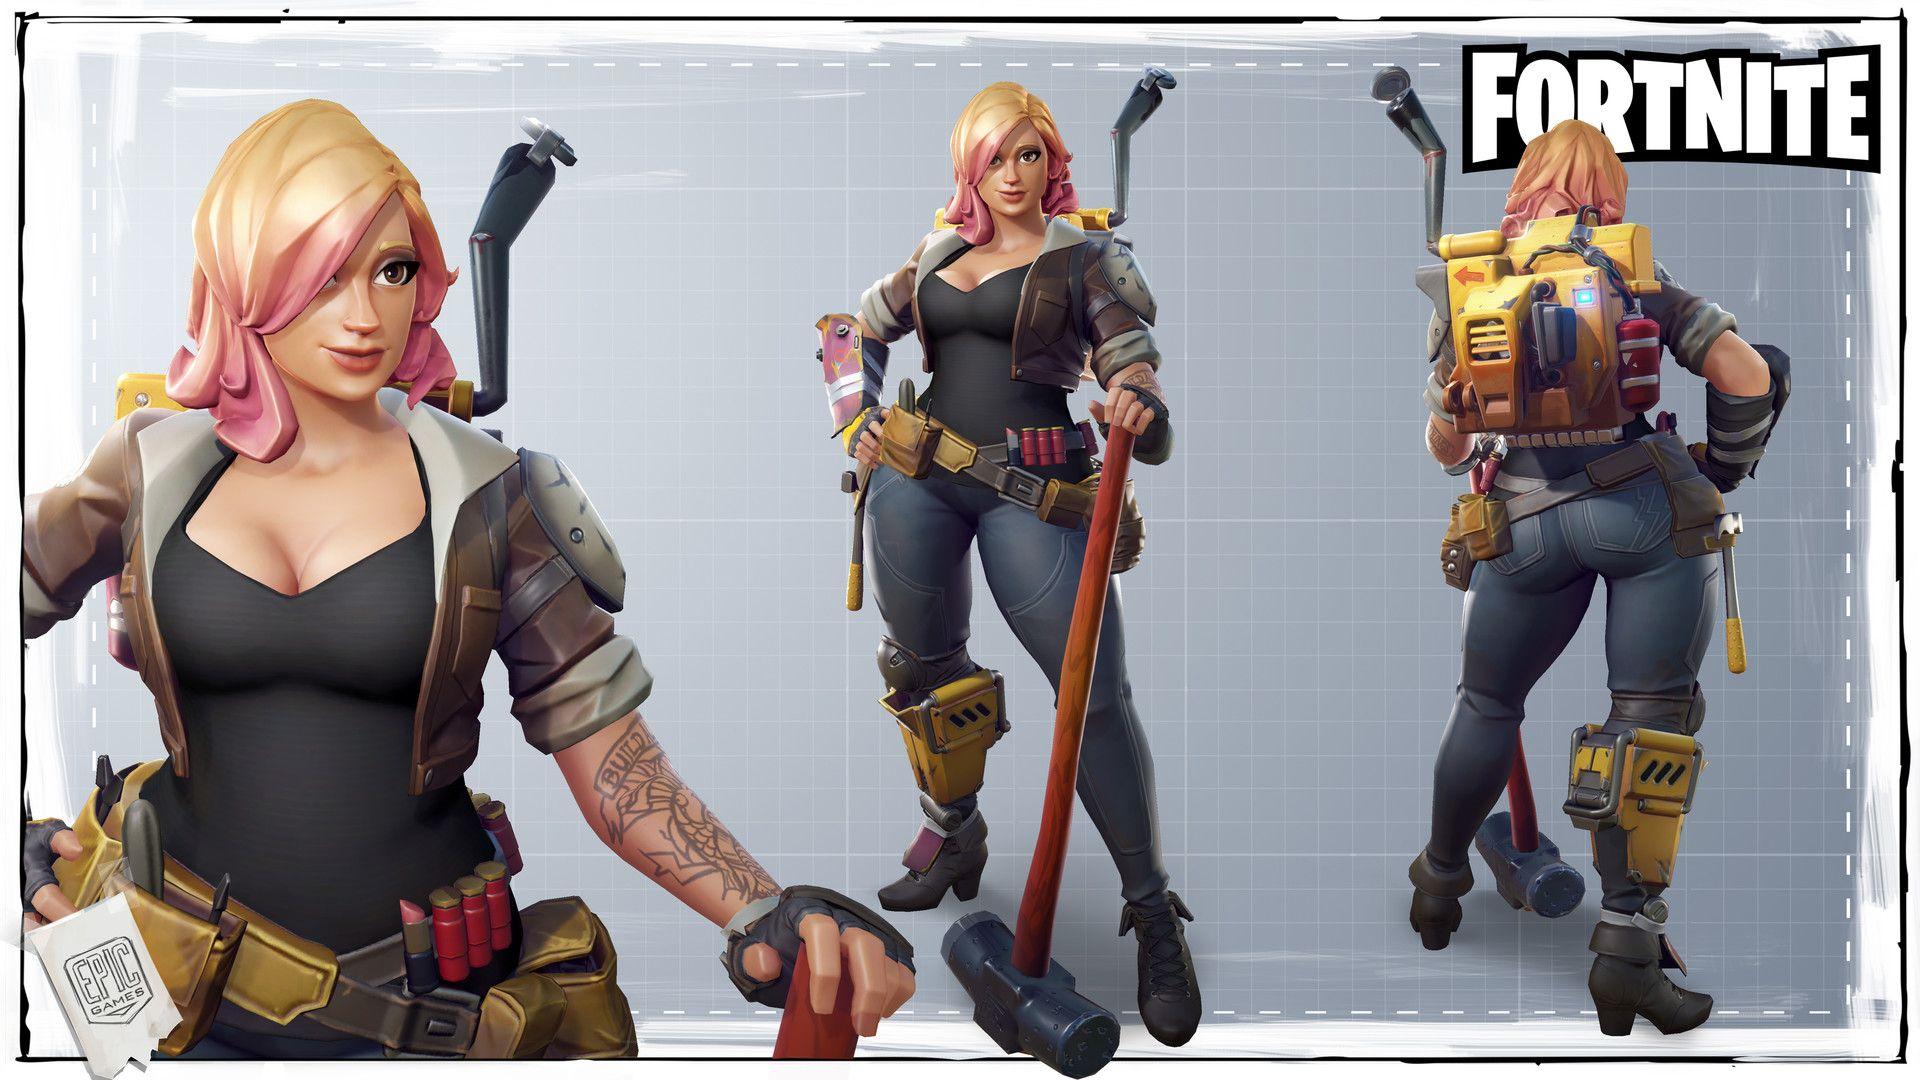 This is the female constructor model I created for Fortnite. Concept